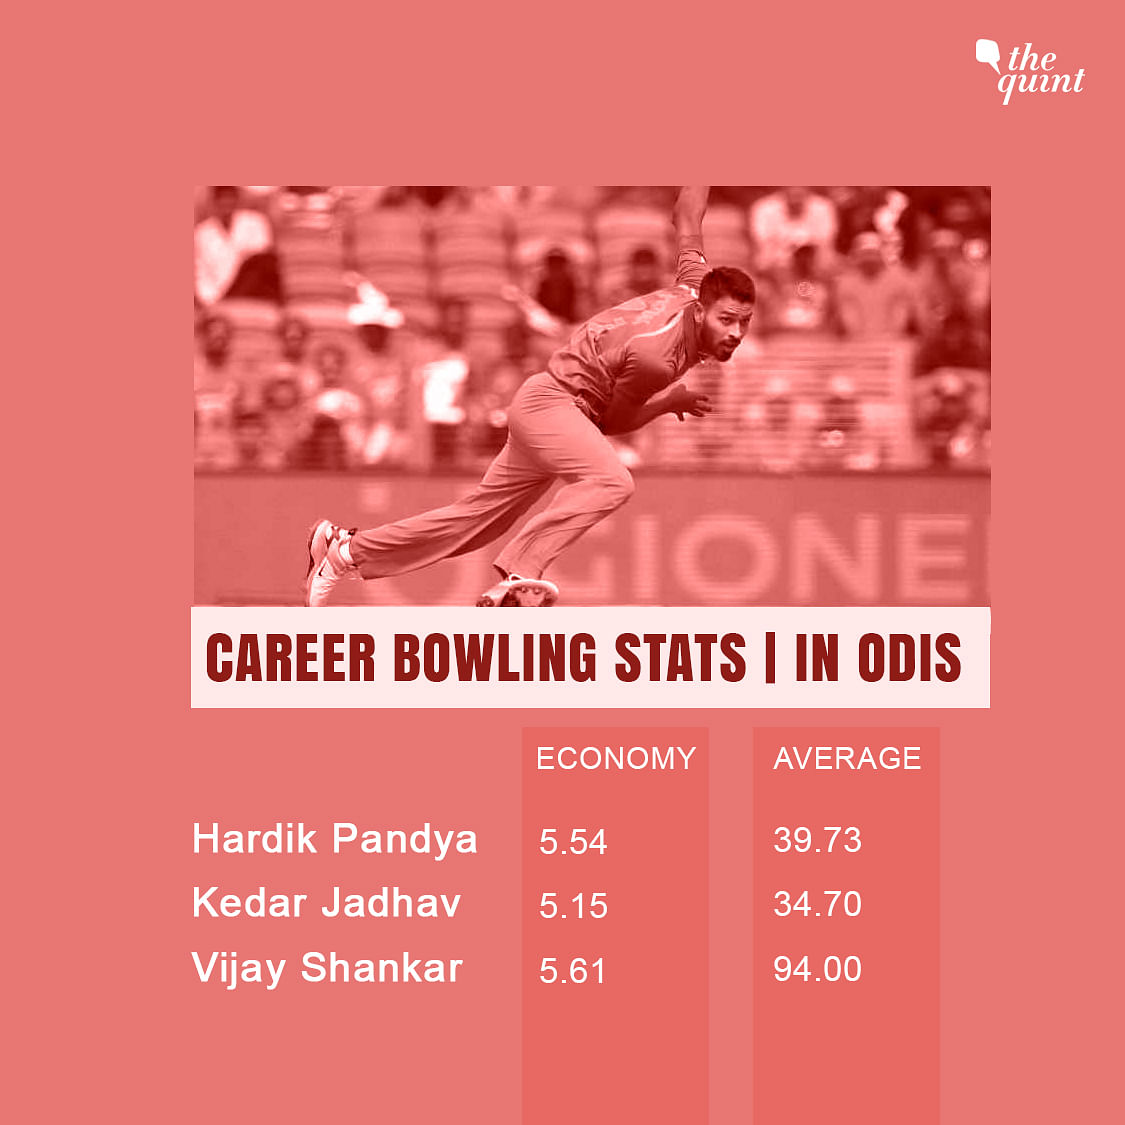 Given the Indian team’s likely combination, Hardik Pandya should expect to bowl at least seven overs every match.